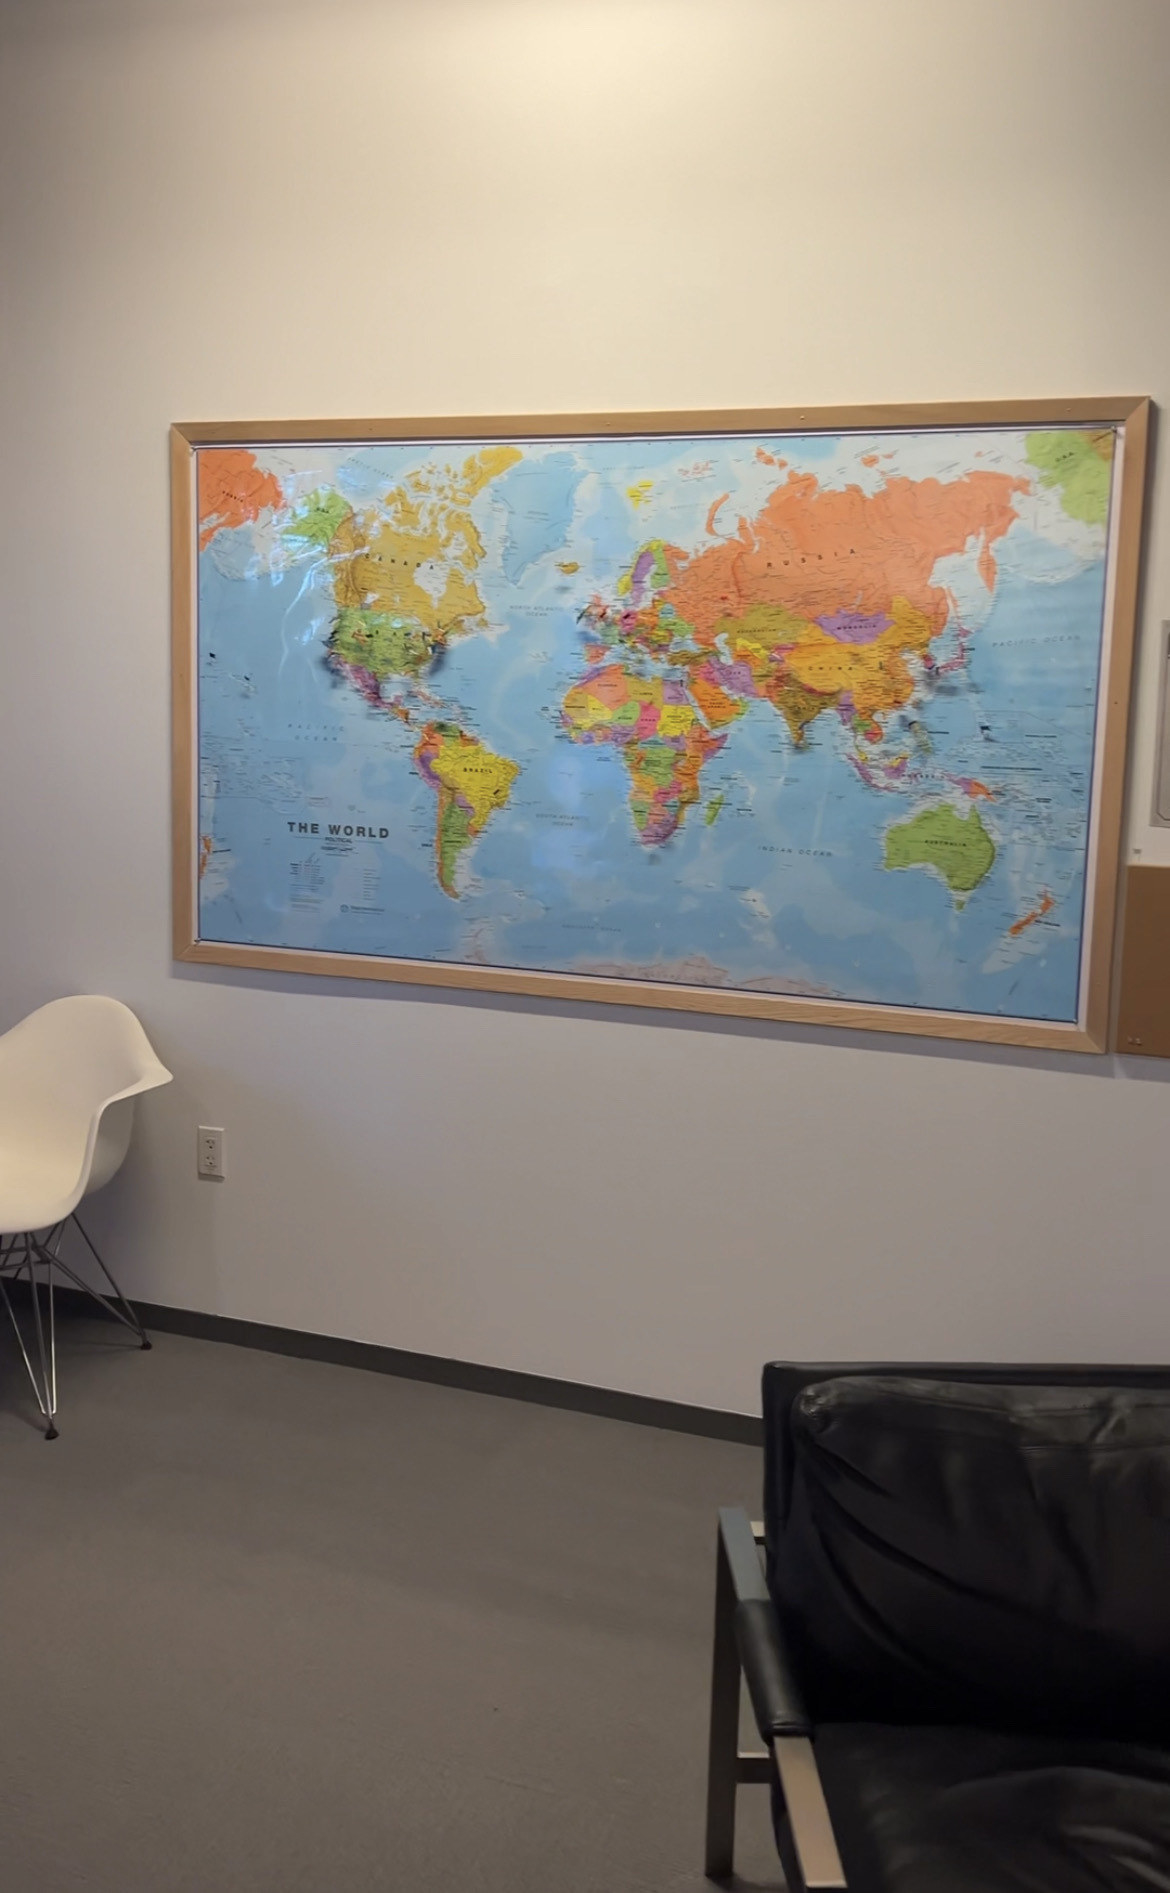 A large framed map on the wall